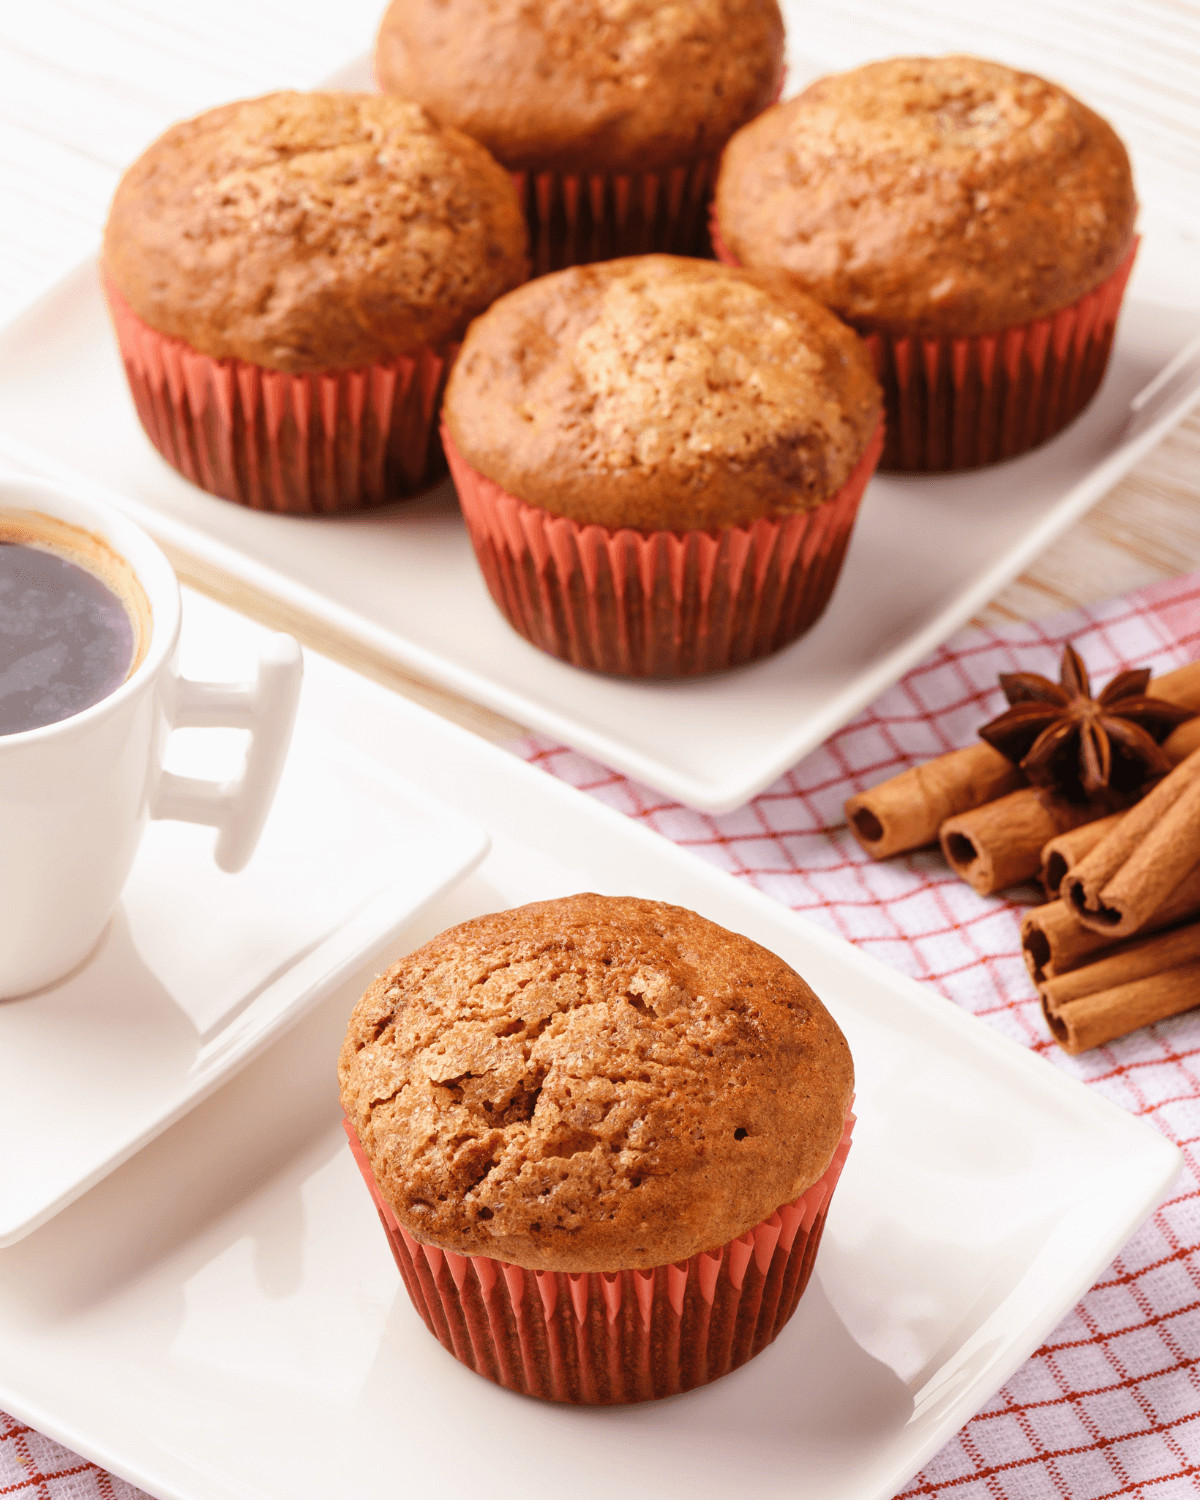 Spice cake pumpkin muffins with coffee on the side.